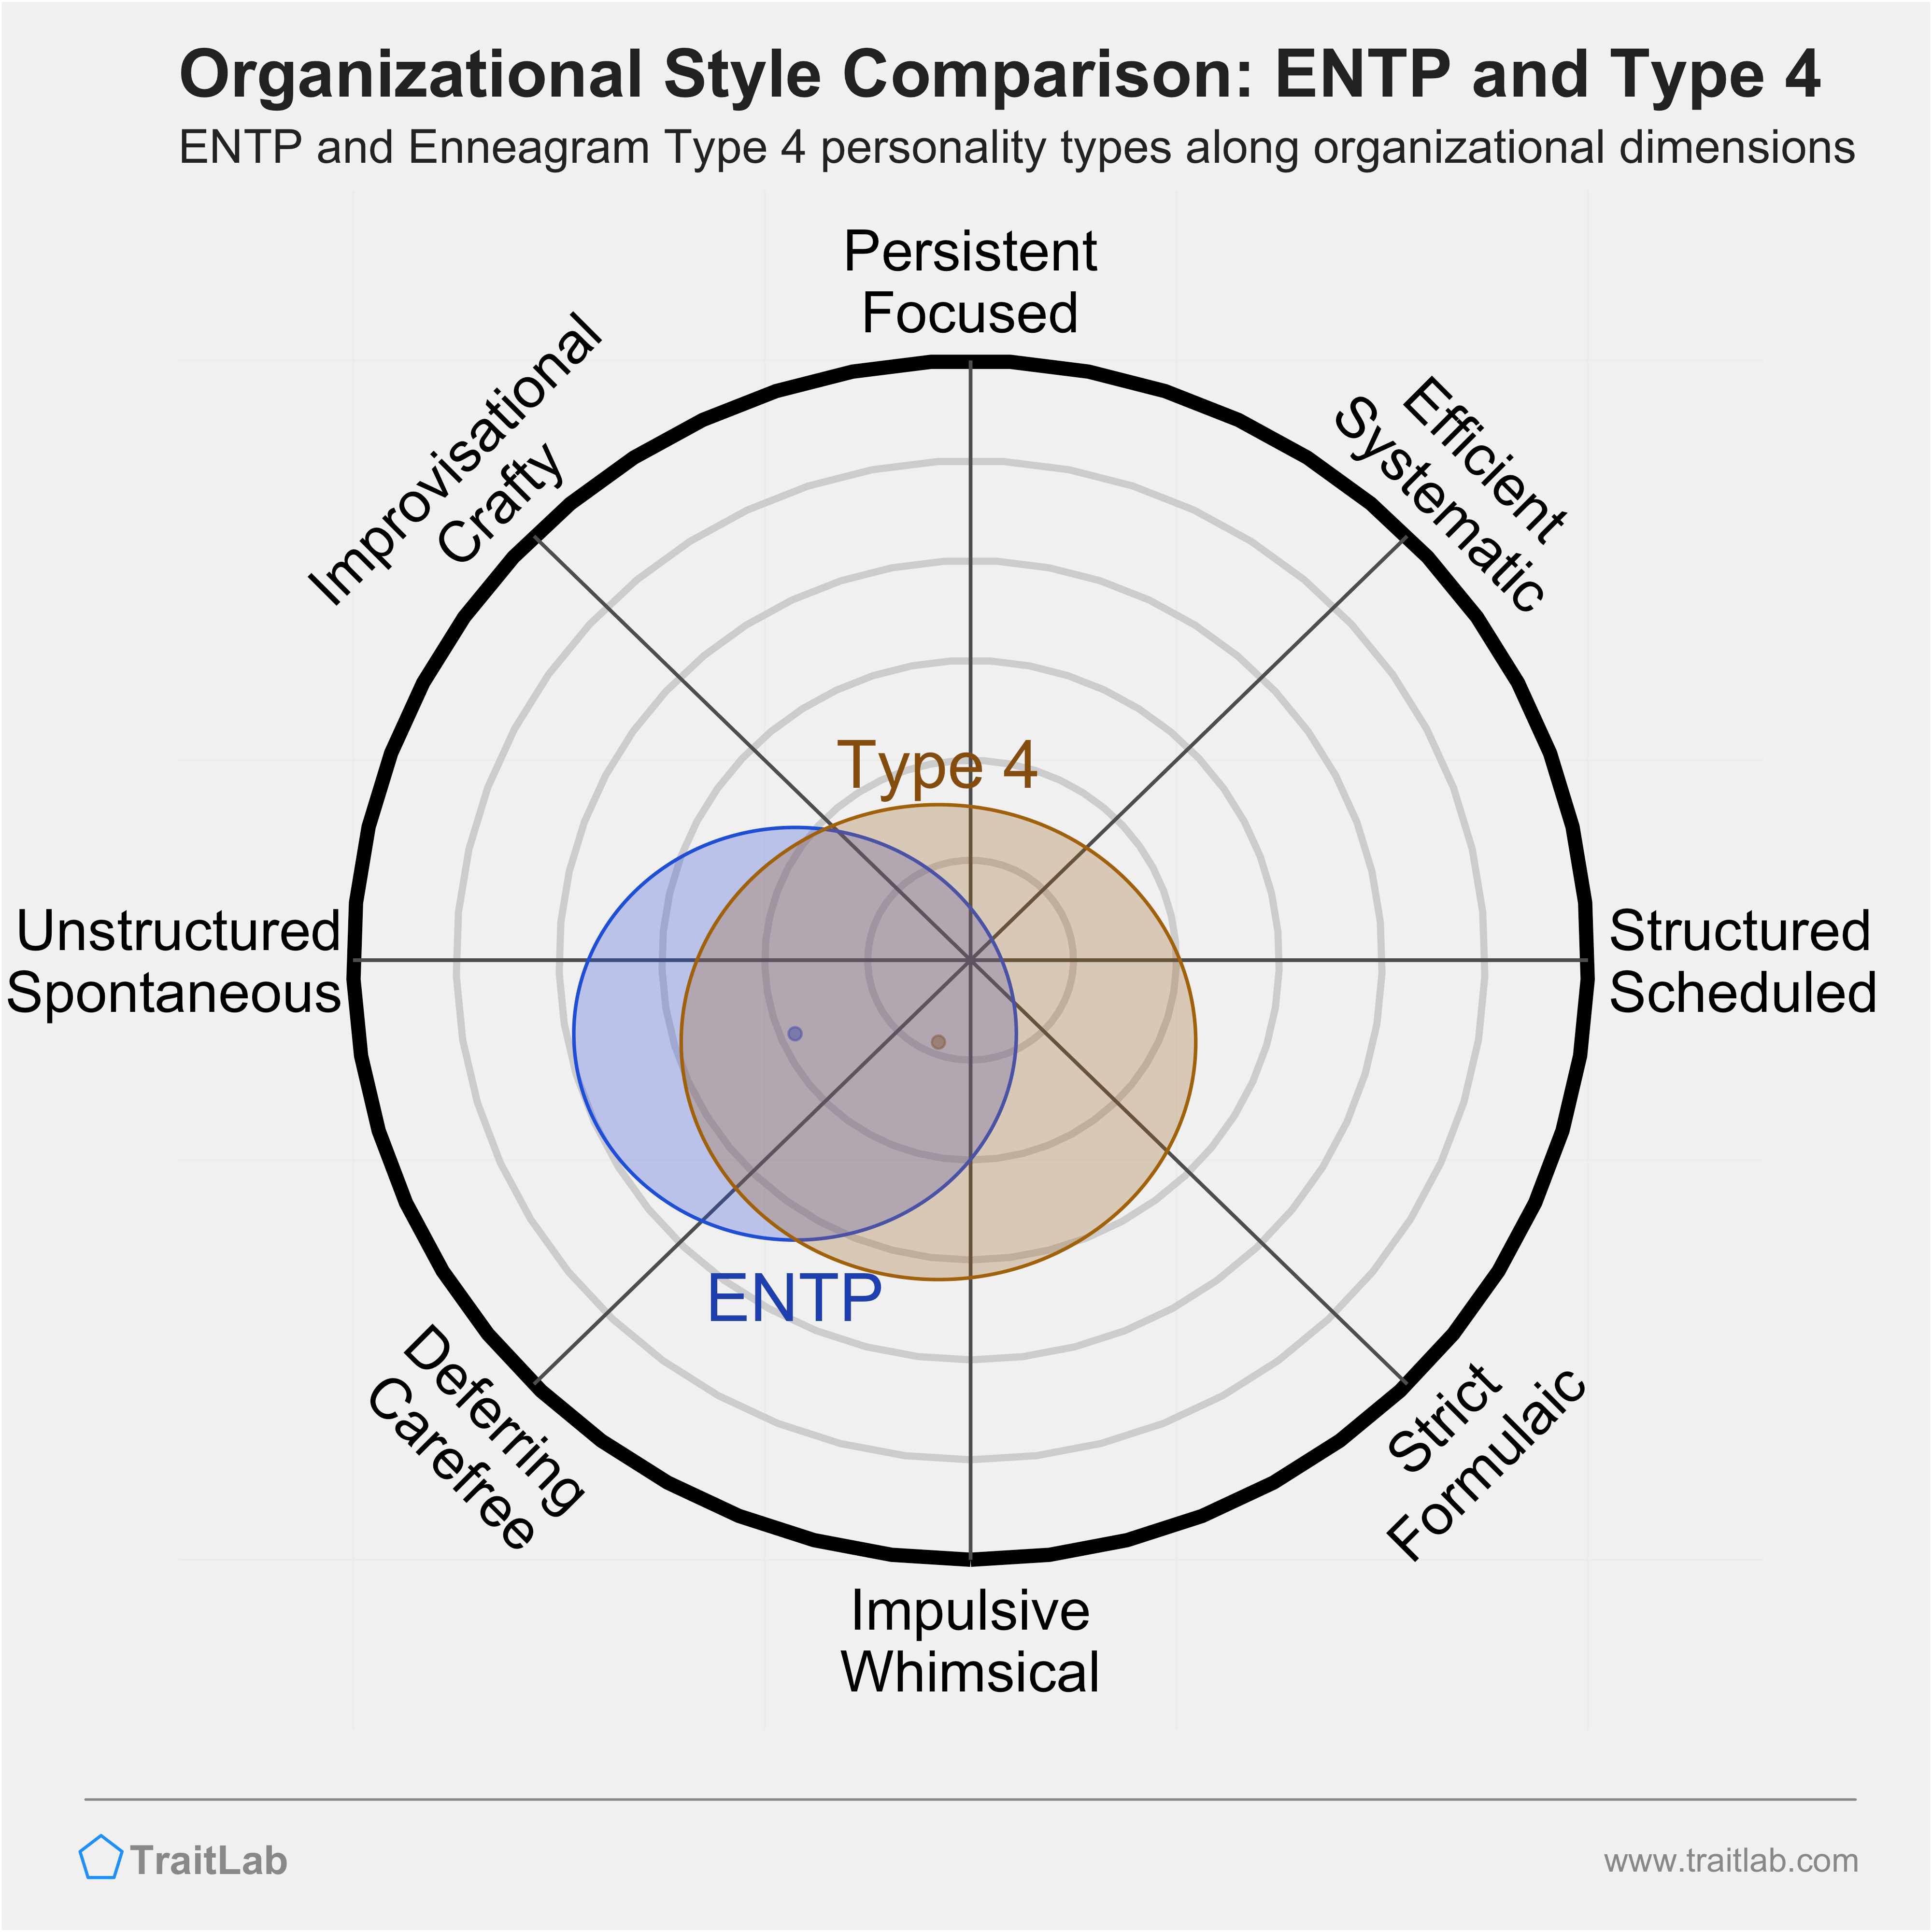 ENTP and Type 4 comparison across organizational dimensions